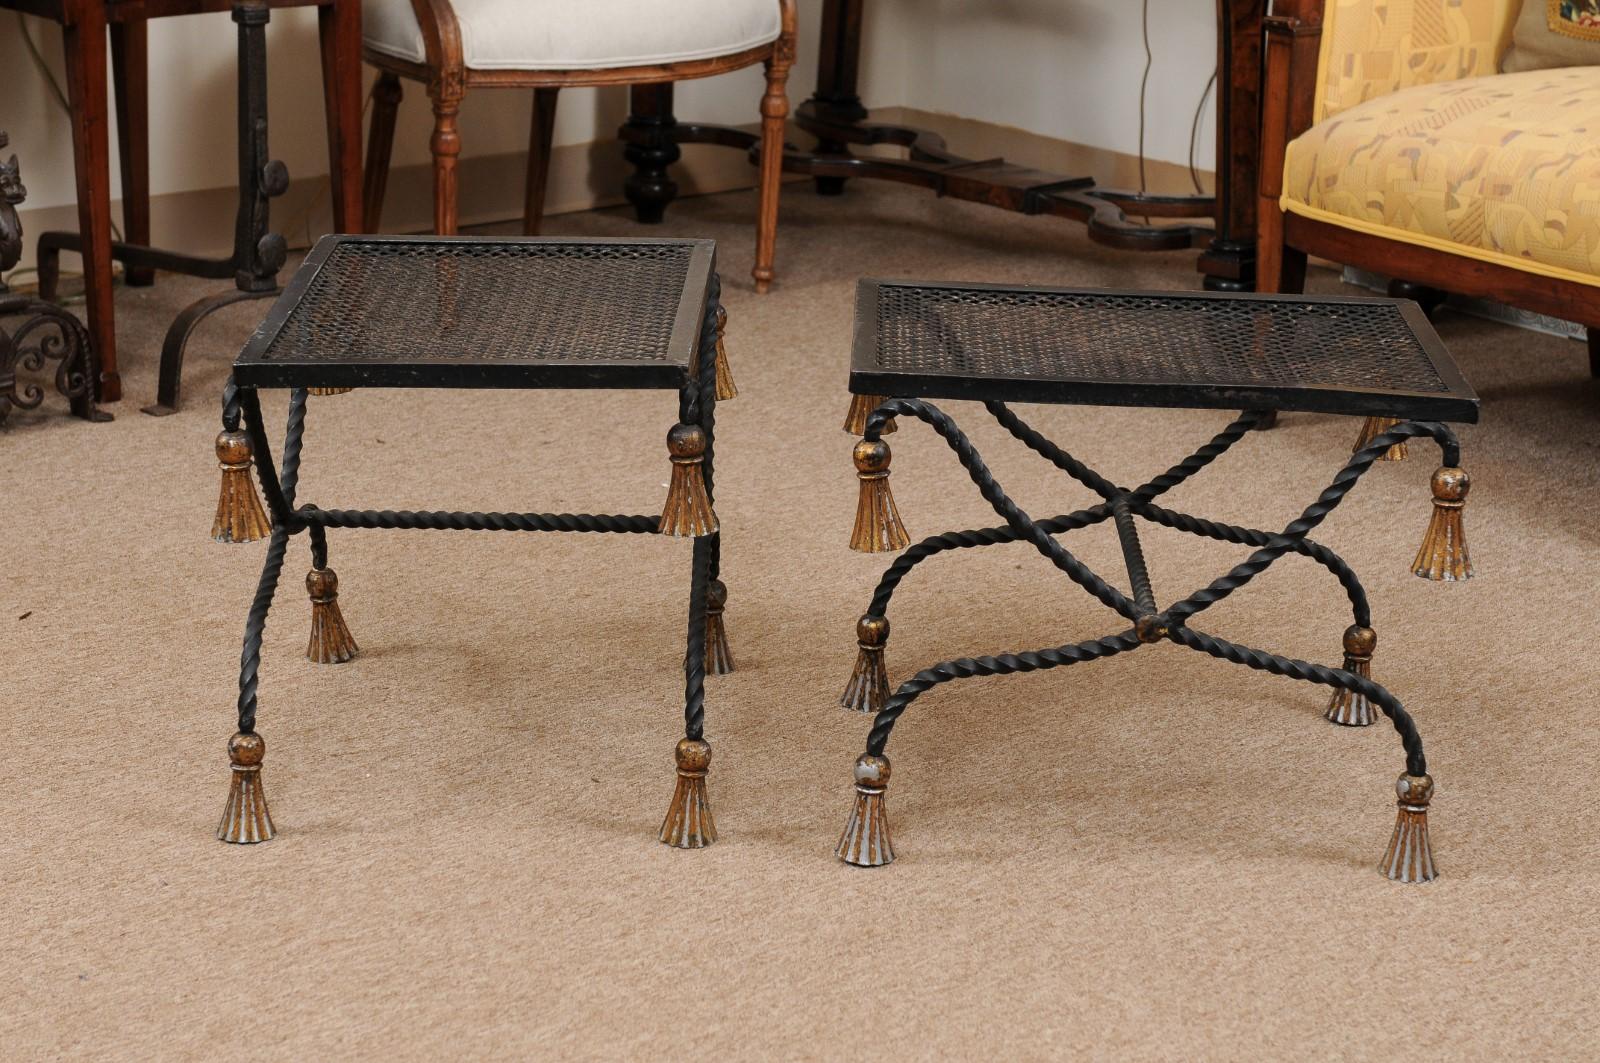 Pair of Vintage Black Painted & Gilt Iron Benches with Tassels, 20th Century For Sale 1